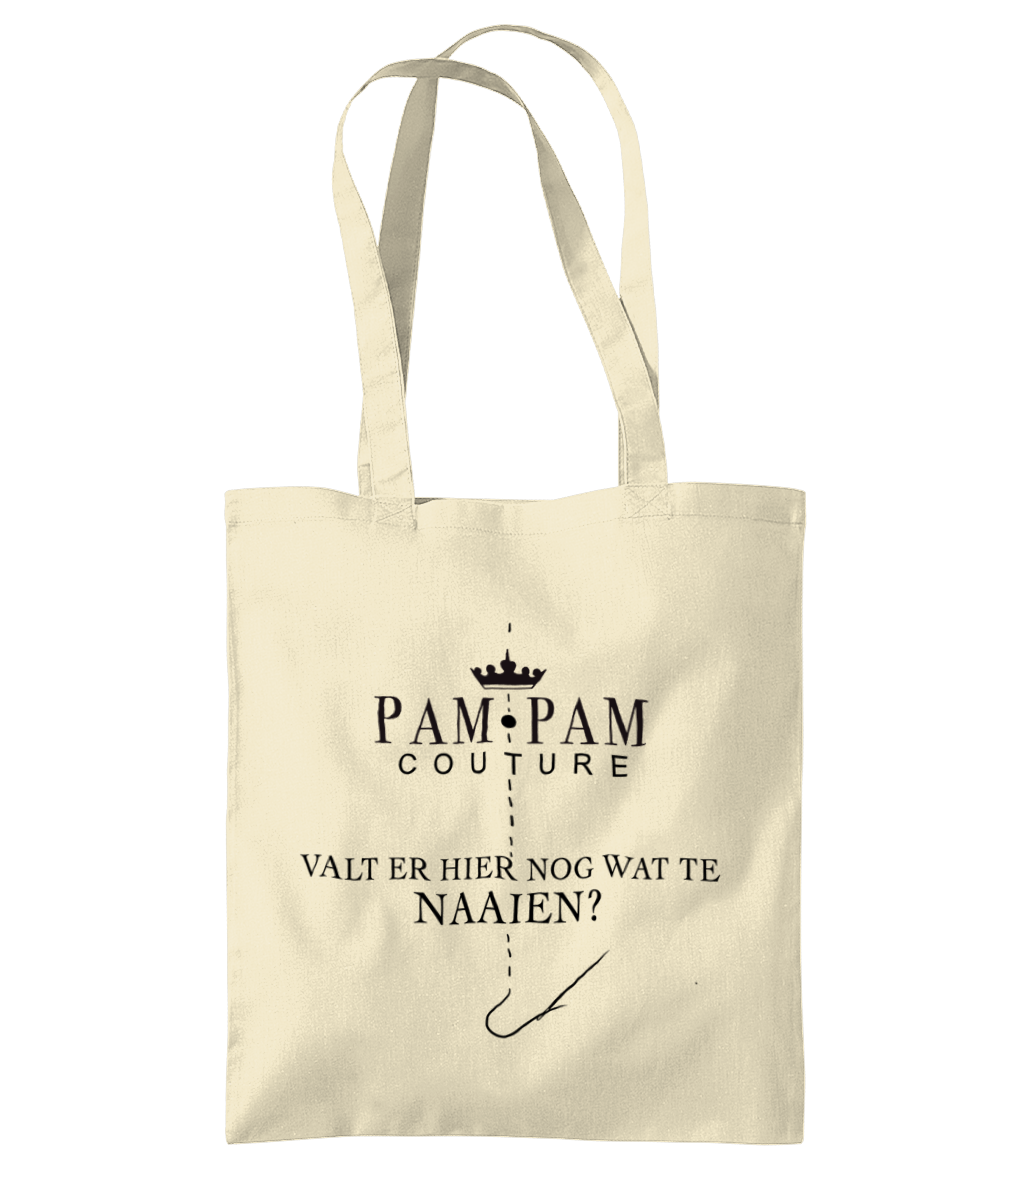 Patty Pam-Pam - Couture Tote Bag